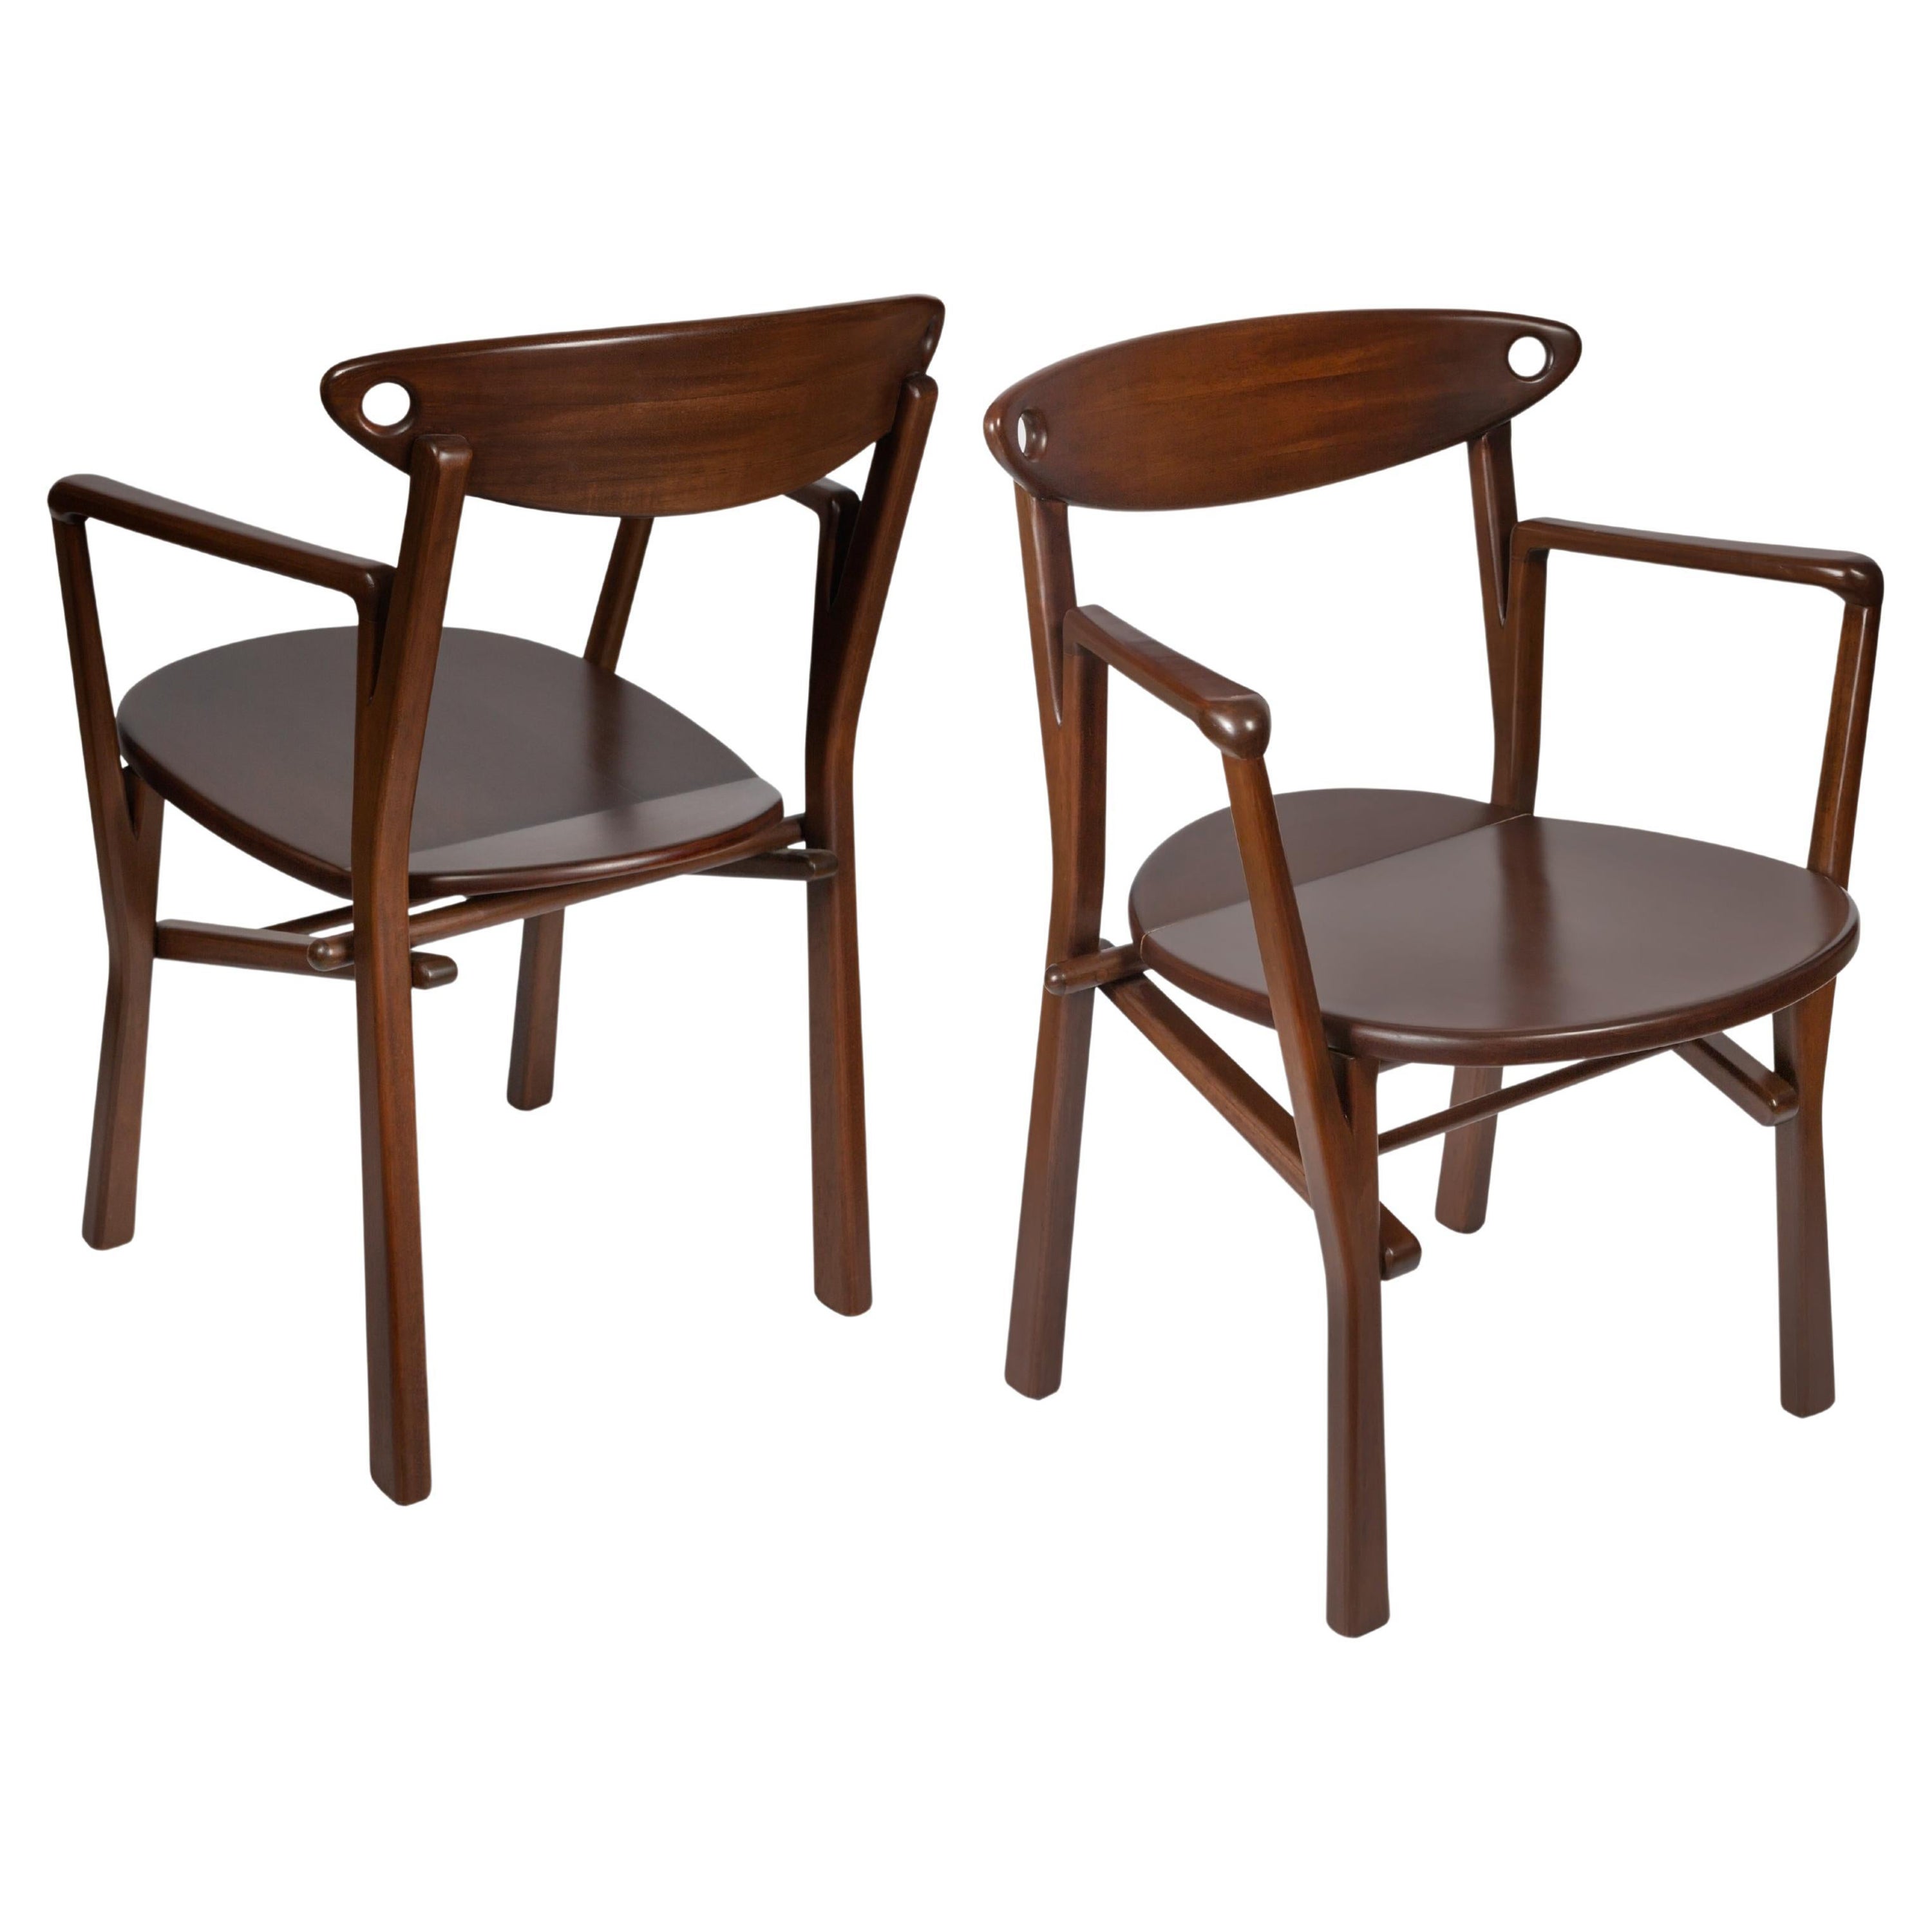 Set of 02 Armchairs Laje in Dark Brown Finish Wood - Ready for Delivery